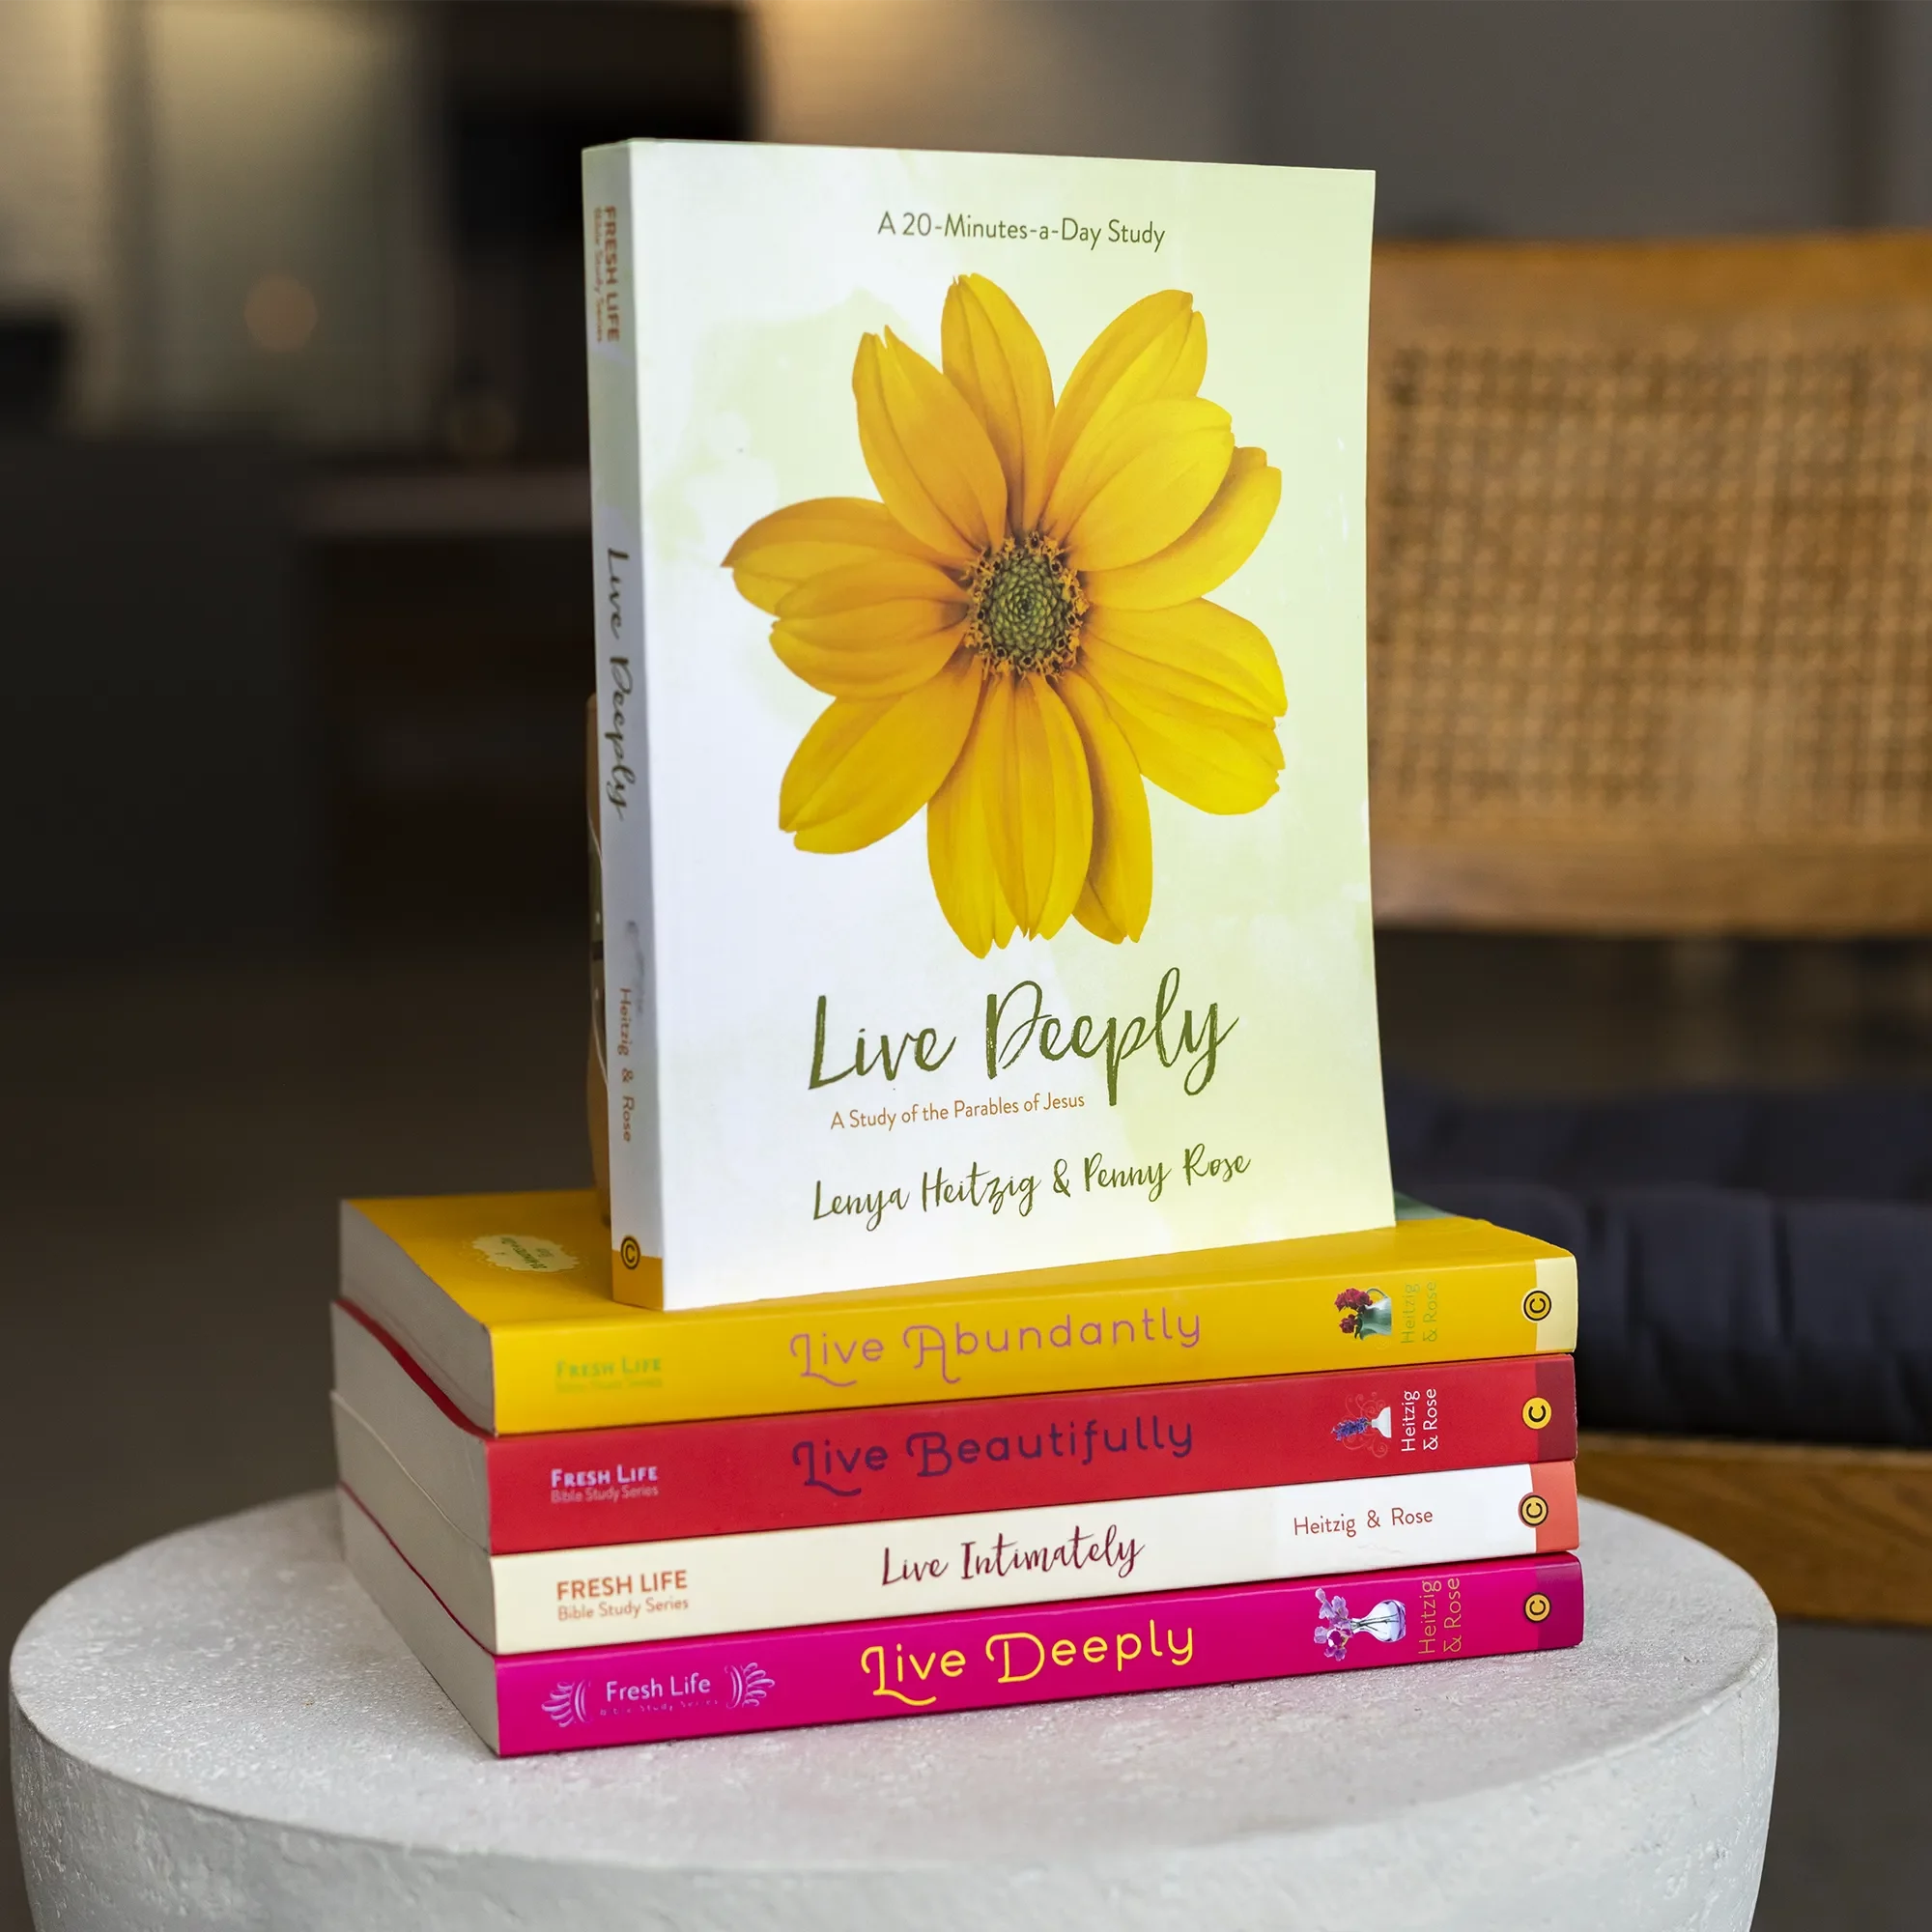 Live Book Series by Lenya Heitzig & Penny Rose